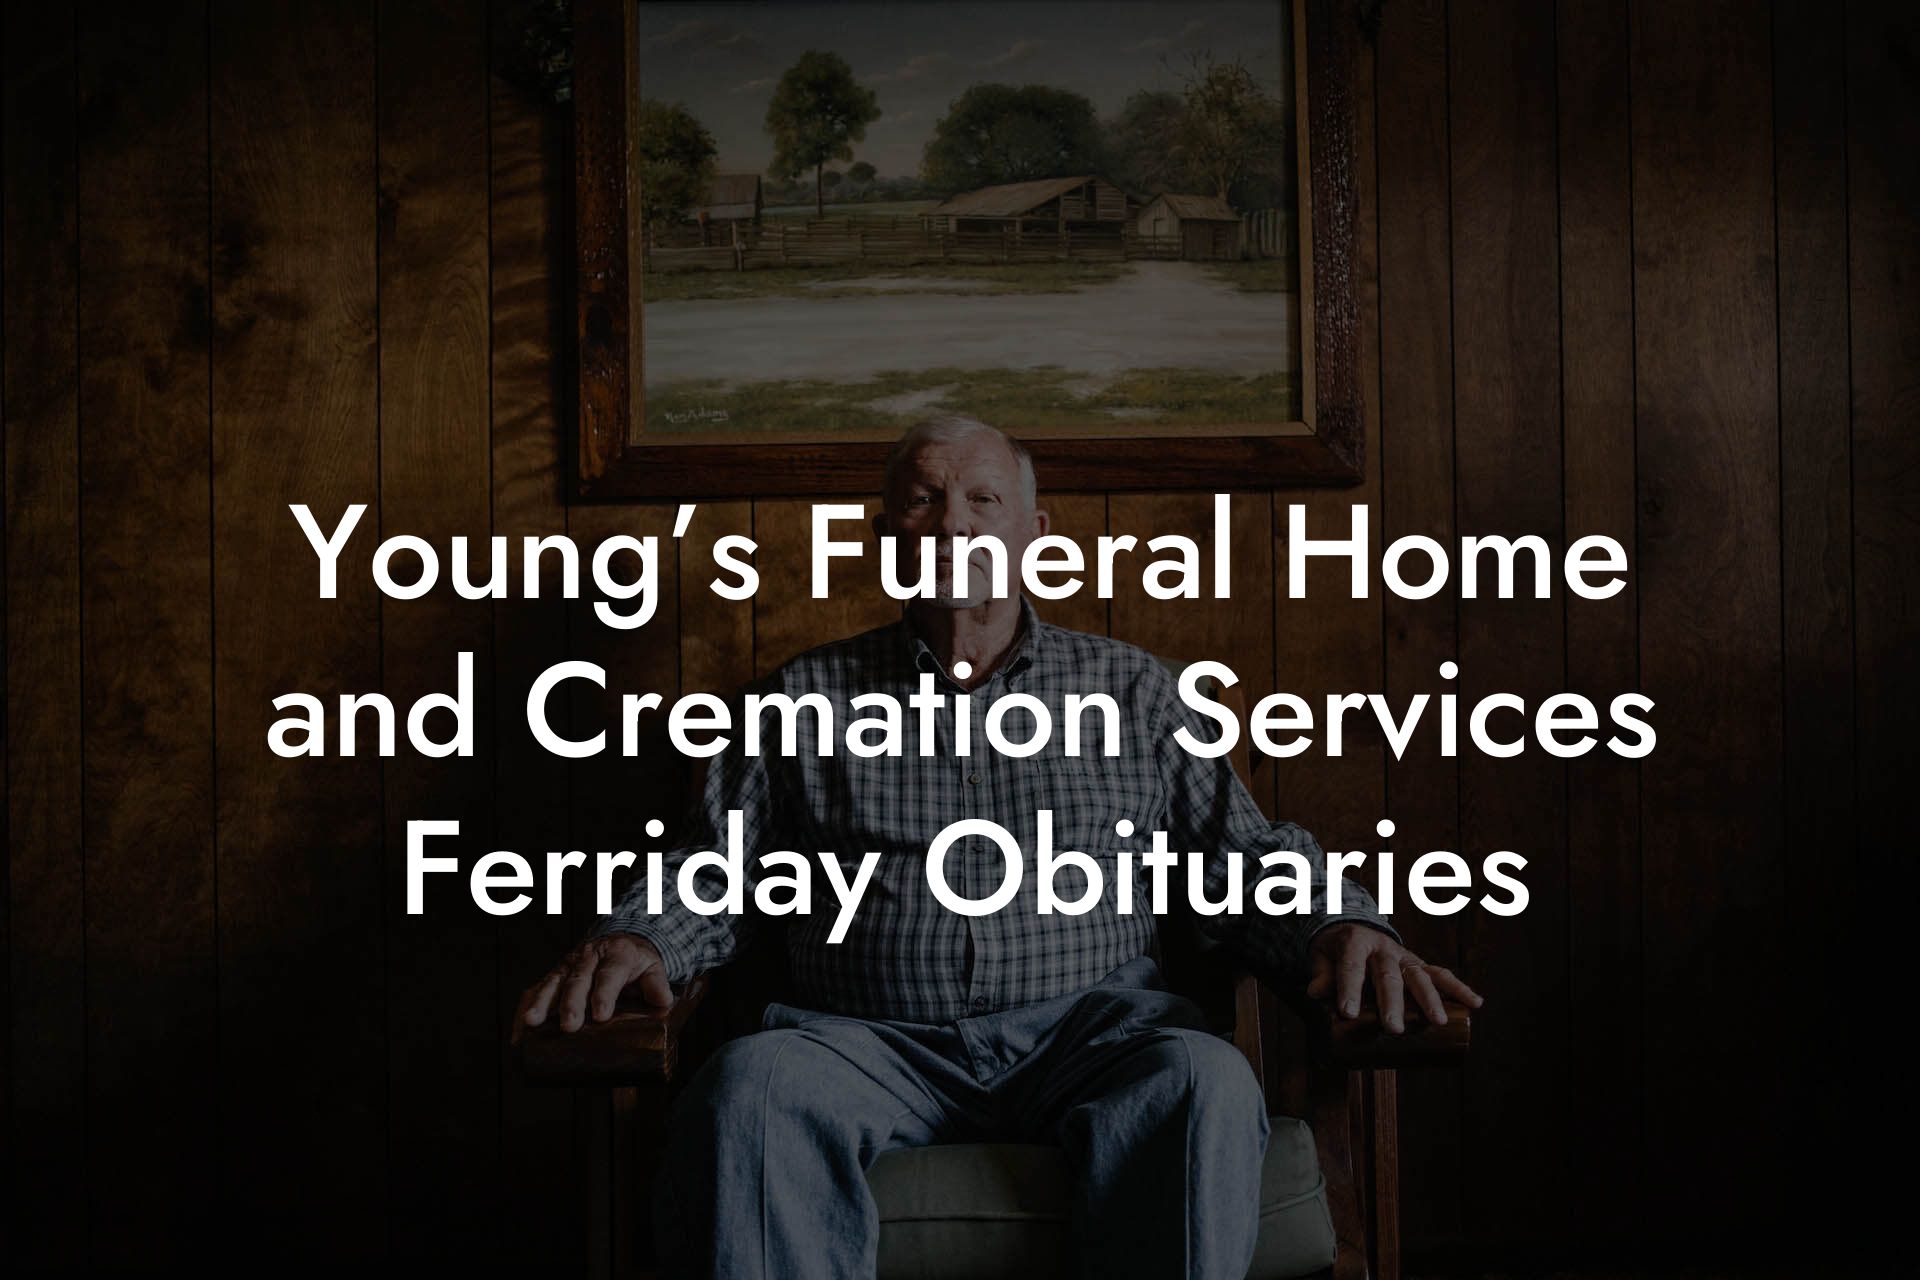 Young’s Funeral Home and Cremation Services Ferriday Obituaries